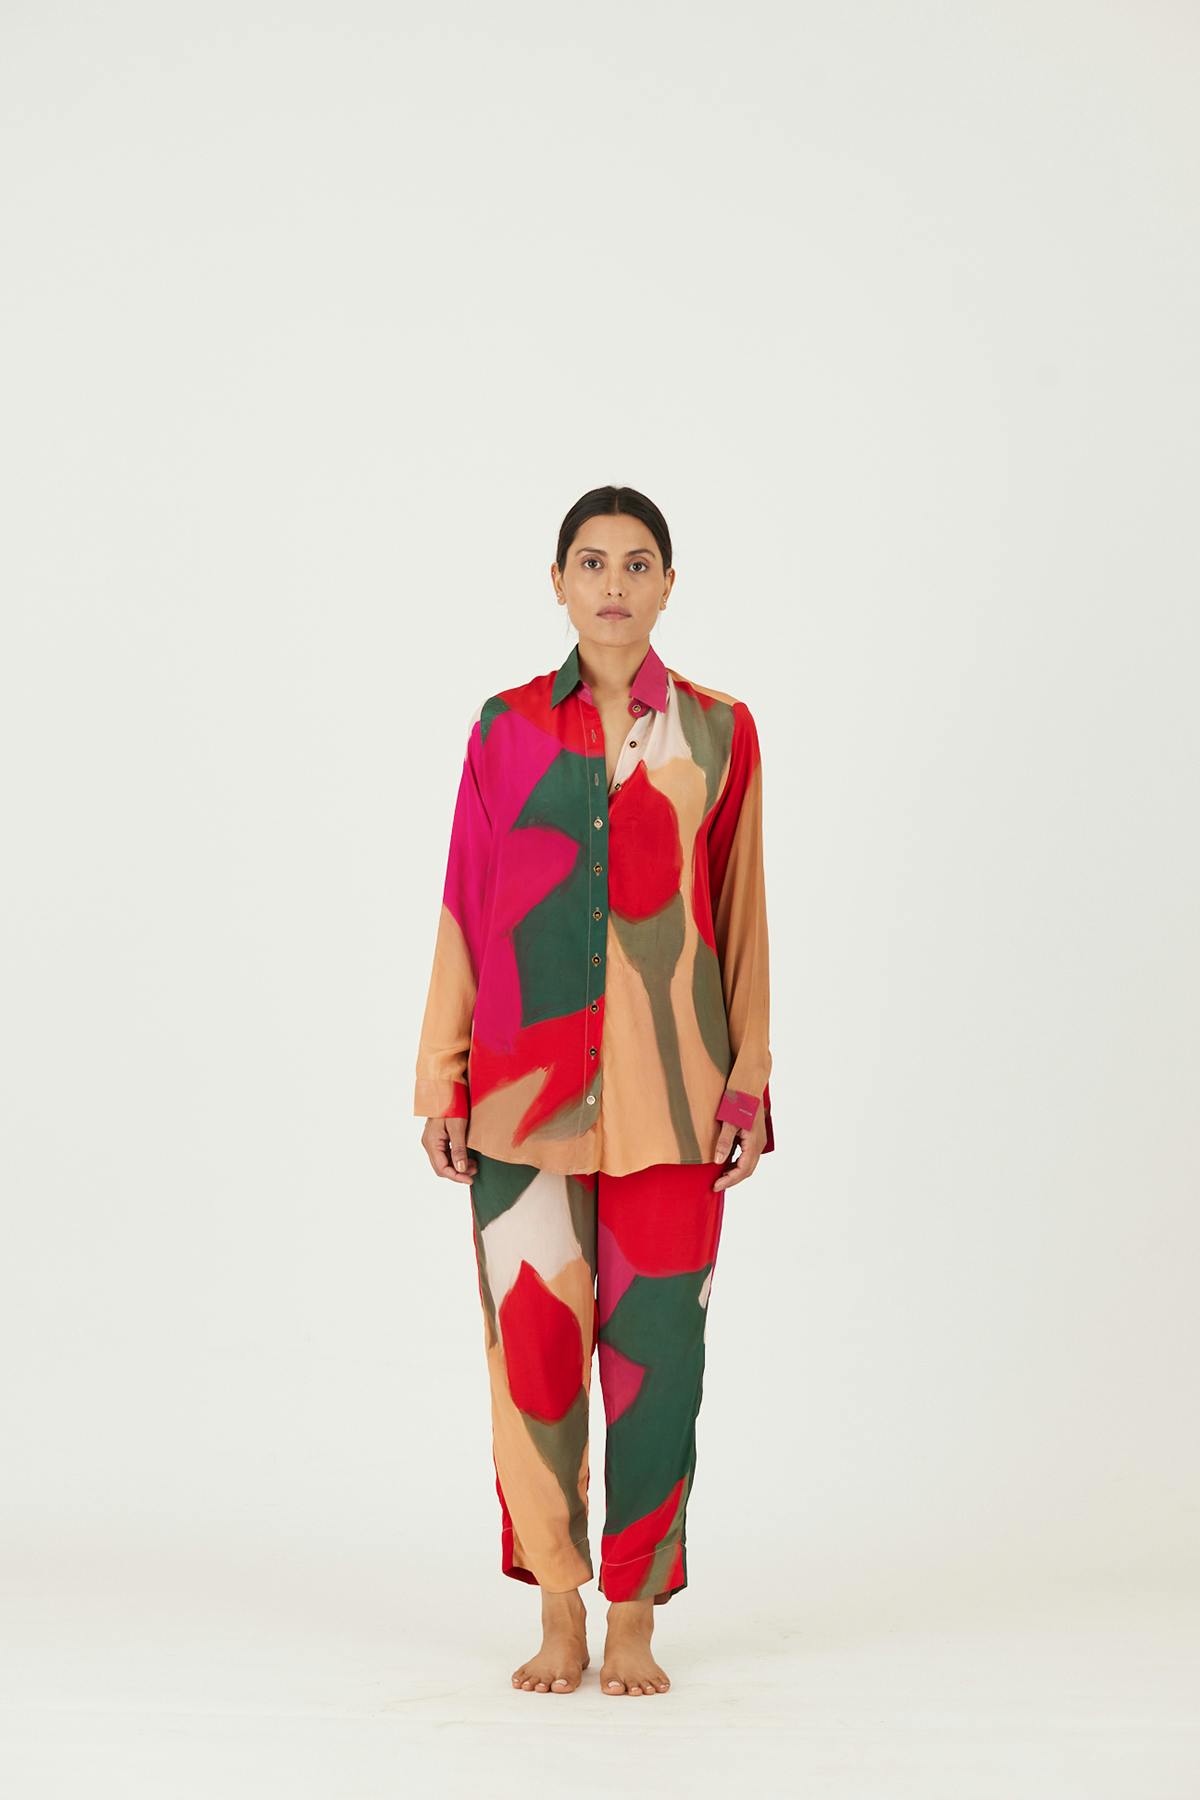 Primary image of LEI LANI RED CO-ORD, a product by Yam India